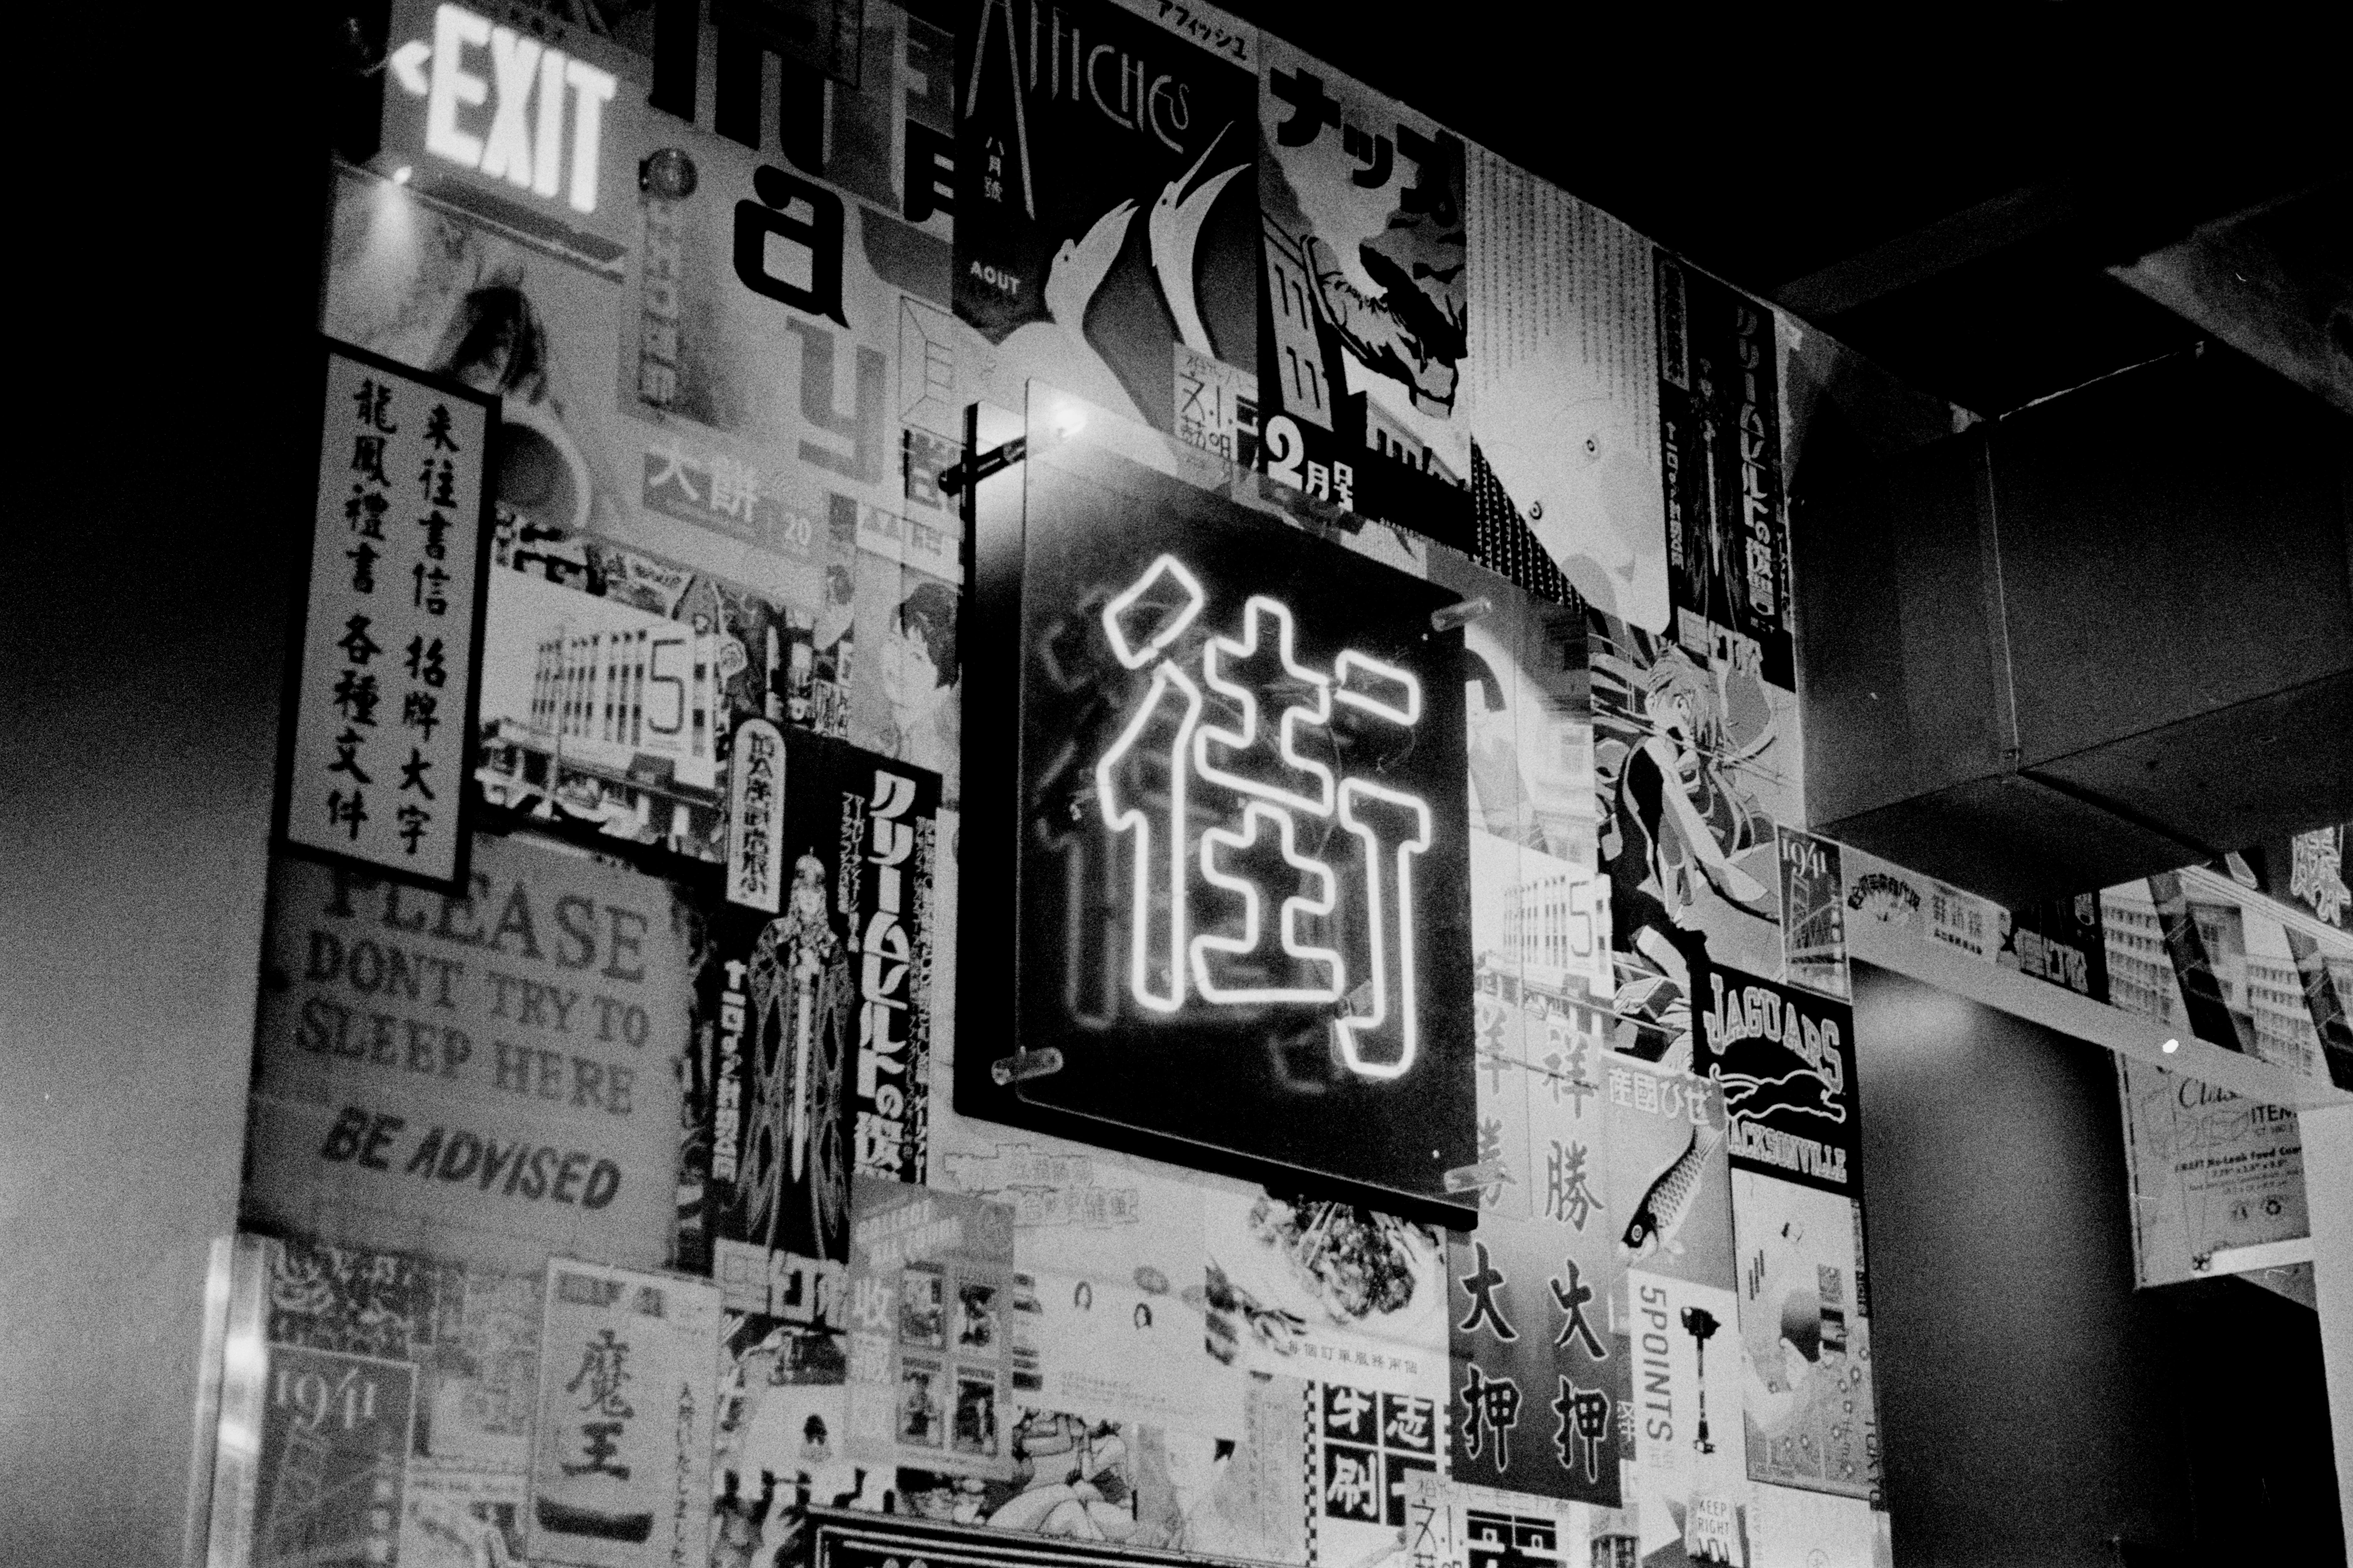 Neon sign of the Kanji 街 (street) on a wall with Japanese posters